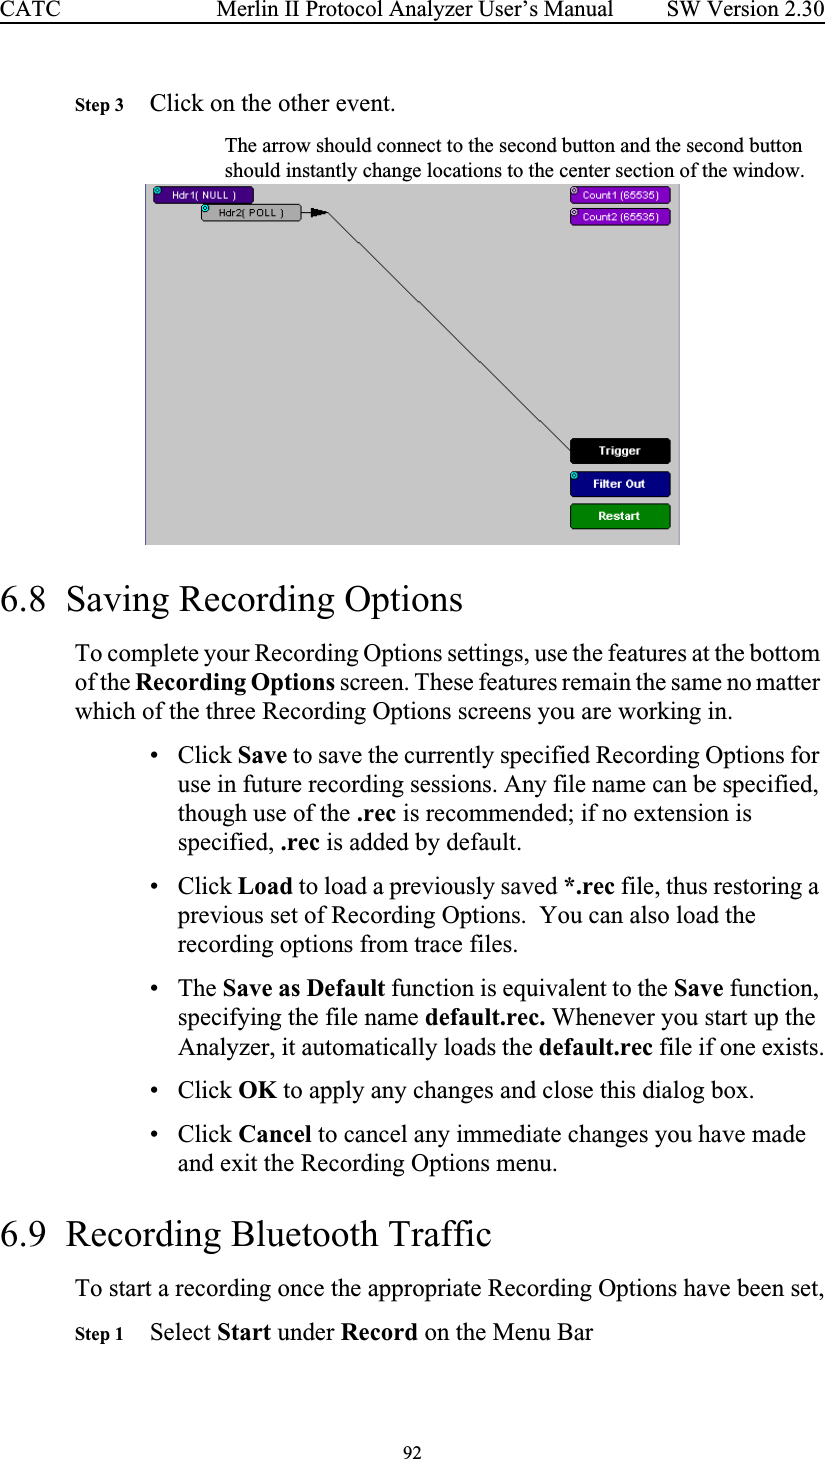 92 Merlin II Protocol Analyzer User’s ManualCATC SW Version 2.30Step 3 Click on the other event.The arrow should connect to the second button and the second button should instantly change locations to the center section of the window.6.8  Saving Recording OptionsTo complete your Recording Options settings, use the features at the bottom of the Recording Options screen. These features remain the same no matter which of the three Recording Options screens you are working in.•Click Save to save the currently specified Recording Options for use in future recording sessions. Any file name can be specified, though use of the .rec is recommended; if no extension is specified, .rec is added by default.•Click Load to load a previously saved *.rec file, thus restoring a previous set of Recording Options.  You can also load the recording options from trace files.• The Save as Default function is equivalent to the Save function, specifying the file name default.rec. Whenever you start up the Analyzer, it automatically loads the default.rec file if one exists.•Click OK to apply any changes and close this dialog box.•Click Cancel to cancel any immediate changes you have made and exit the Recording Options menu.6.9  Recording Bluetooth TrafficTo start a recording once the appropriate Recording Options have been set,Step 1 Select Start under Record on the Menu Bar